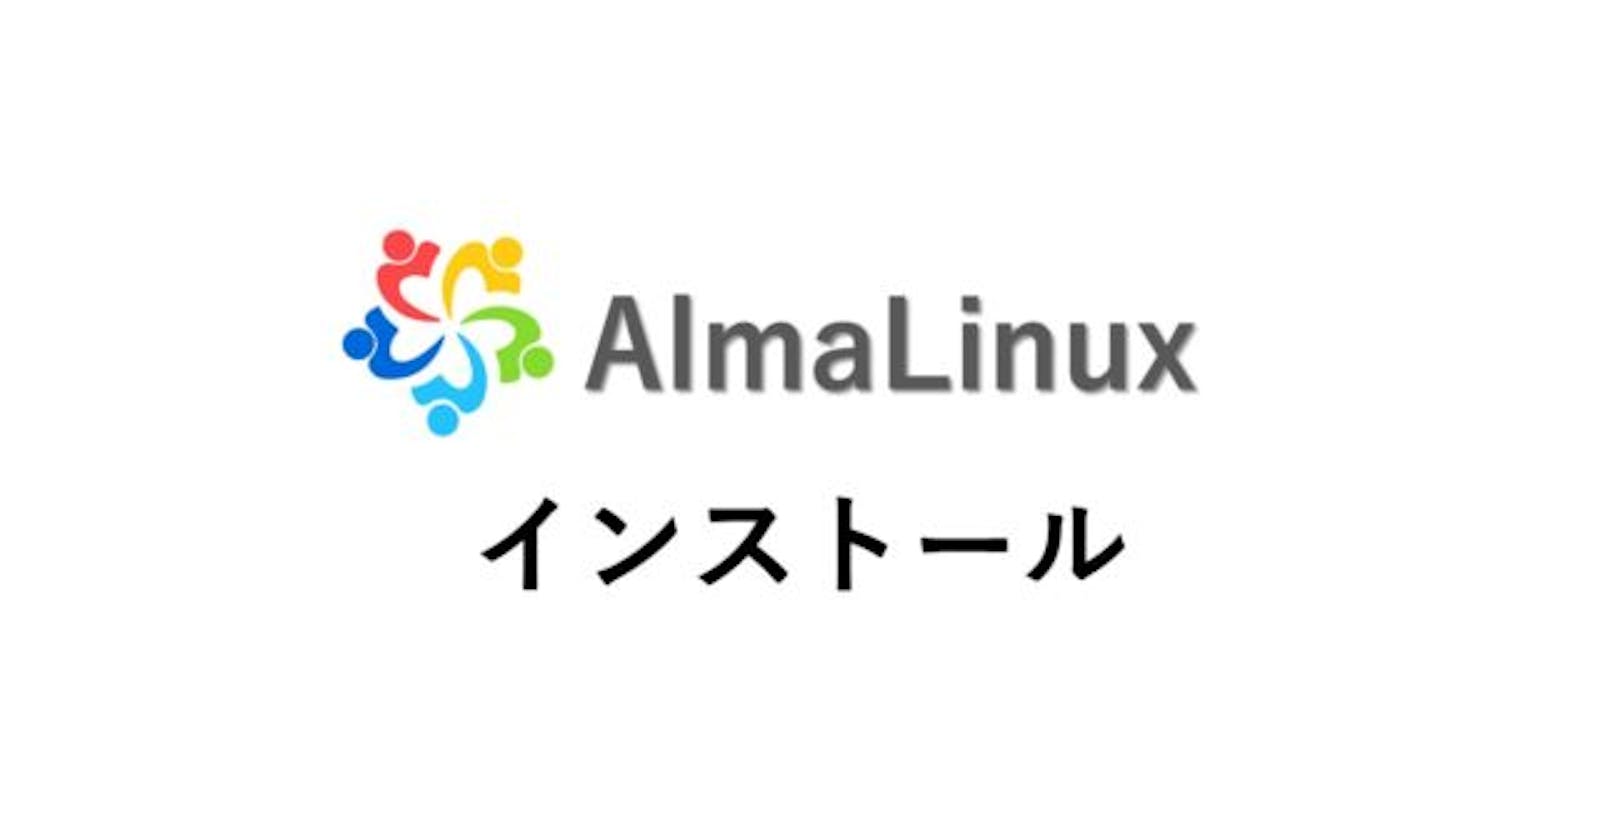 Cloud-init enabled AlmaLinux 8 template for Proxmox to facilitate automatic instance deploy by Terraform